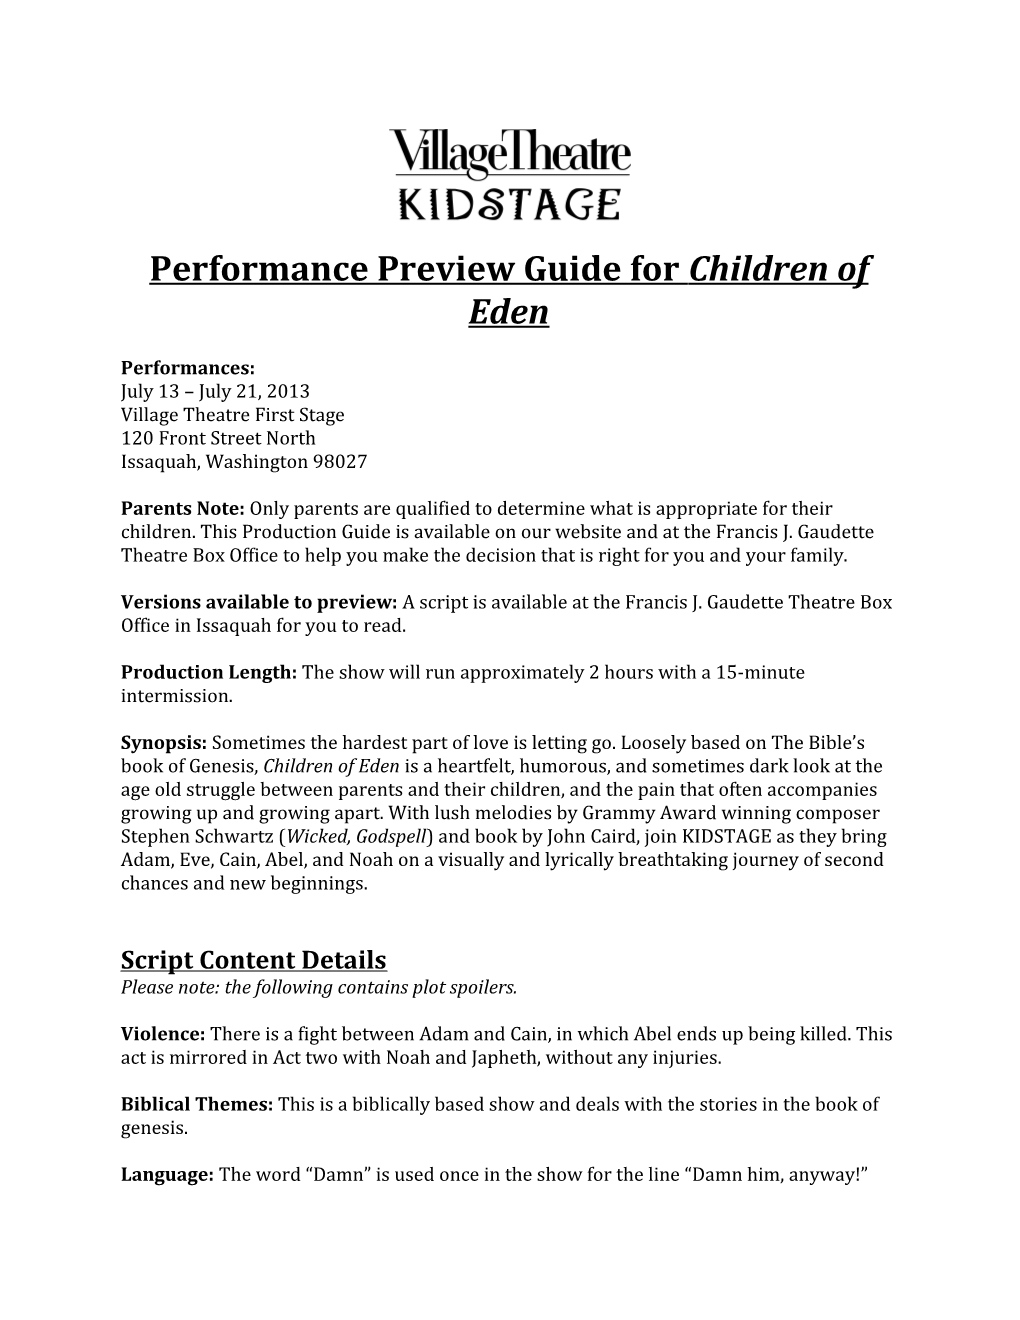 Performance Preview Guide for Children of Eden